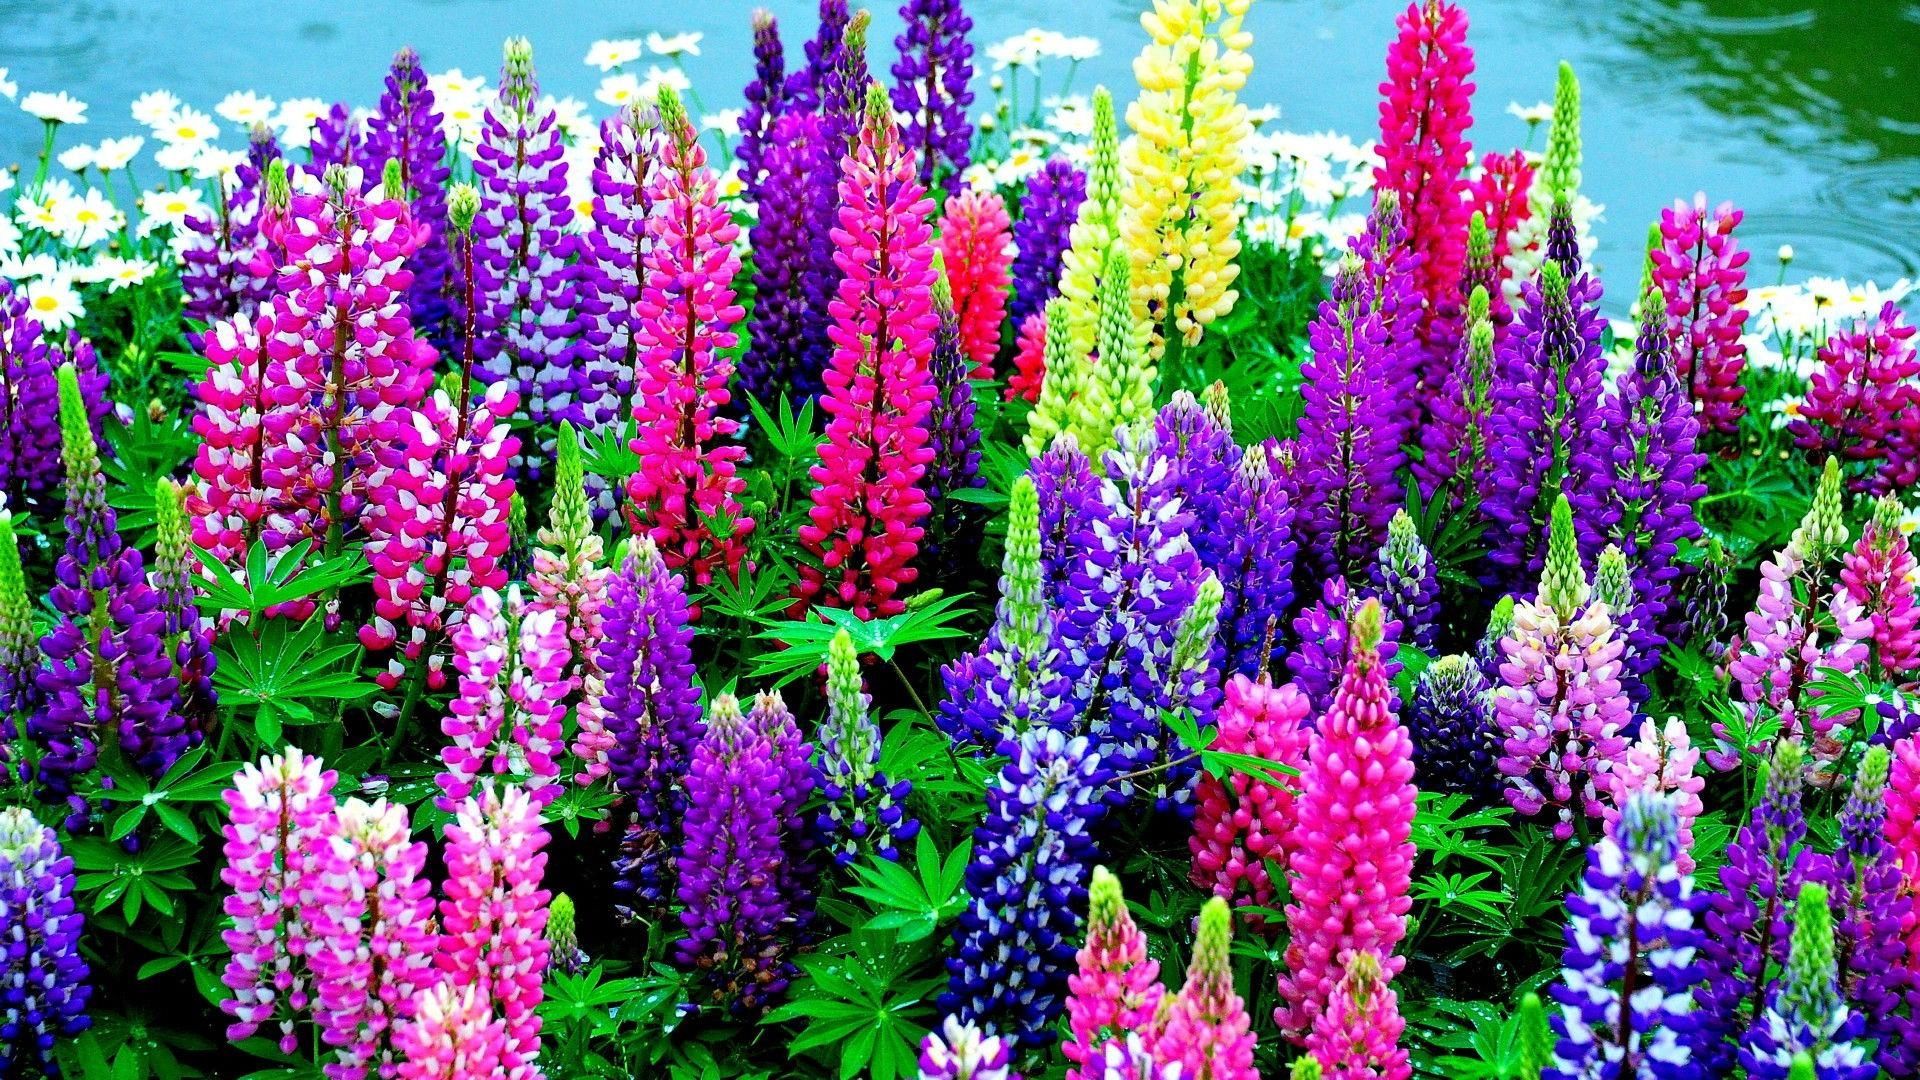 Download wallpaper 1920x1080 lupines, daisies, flowers, colorful